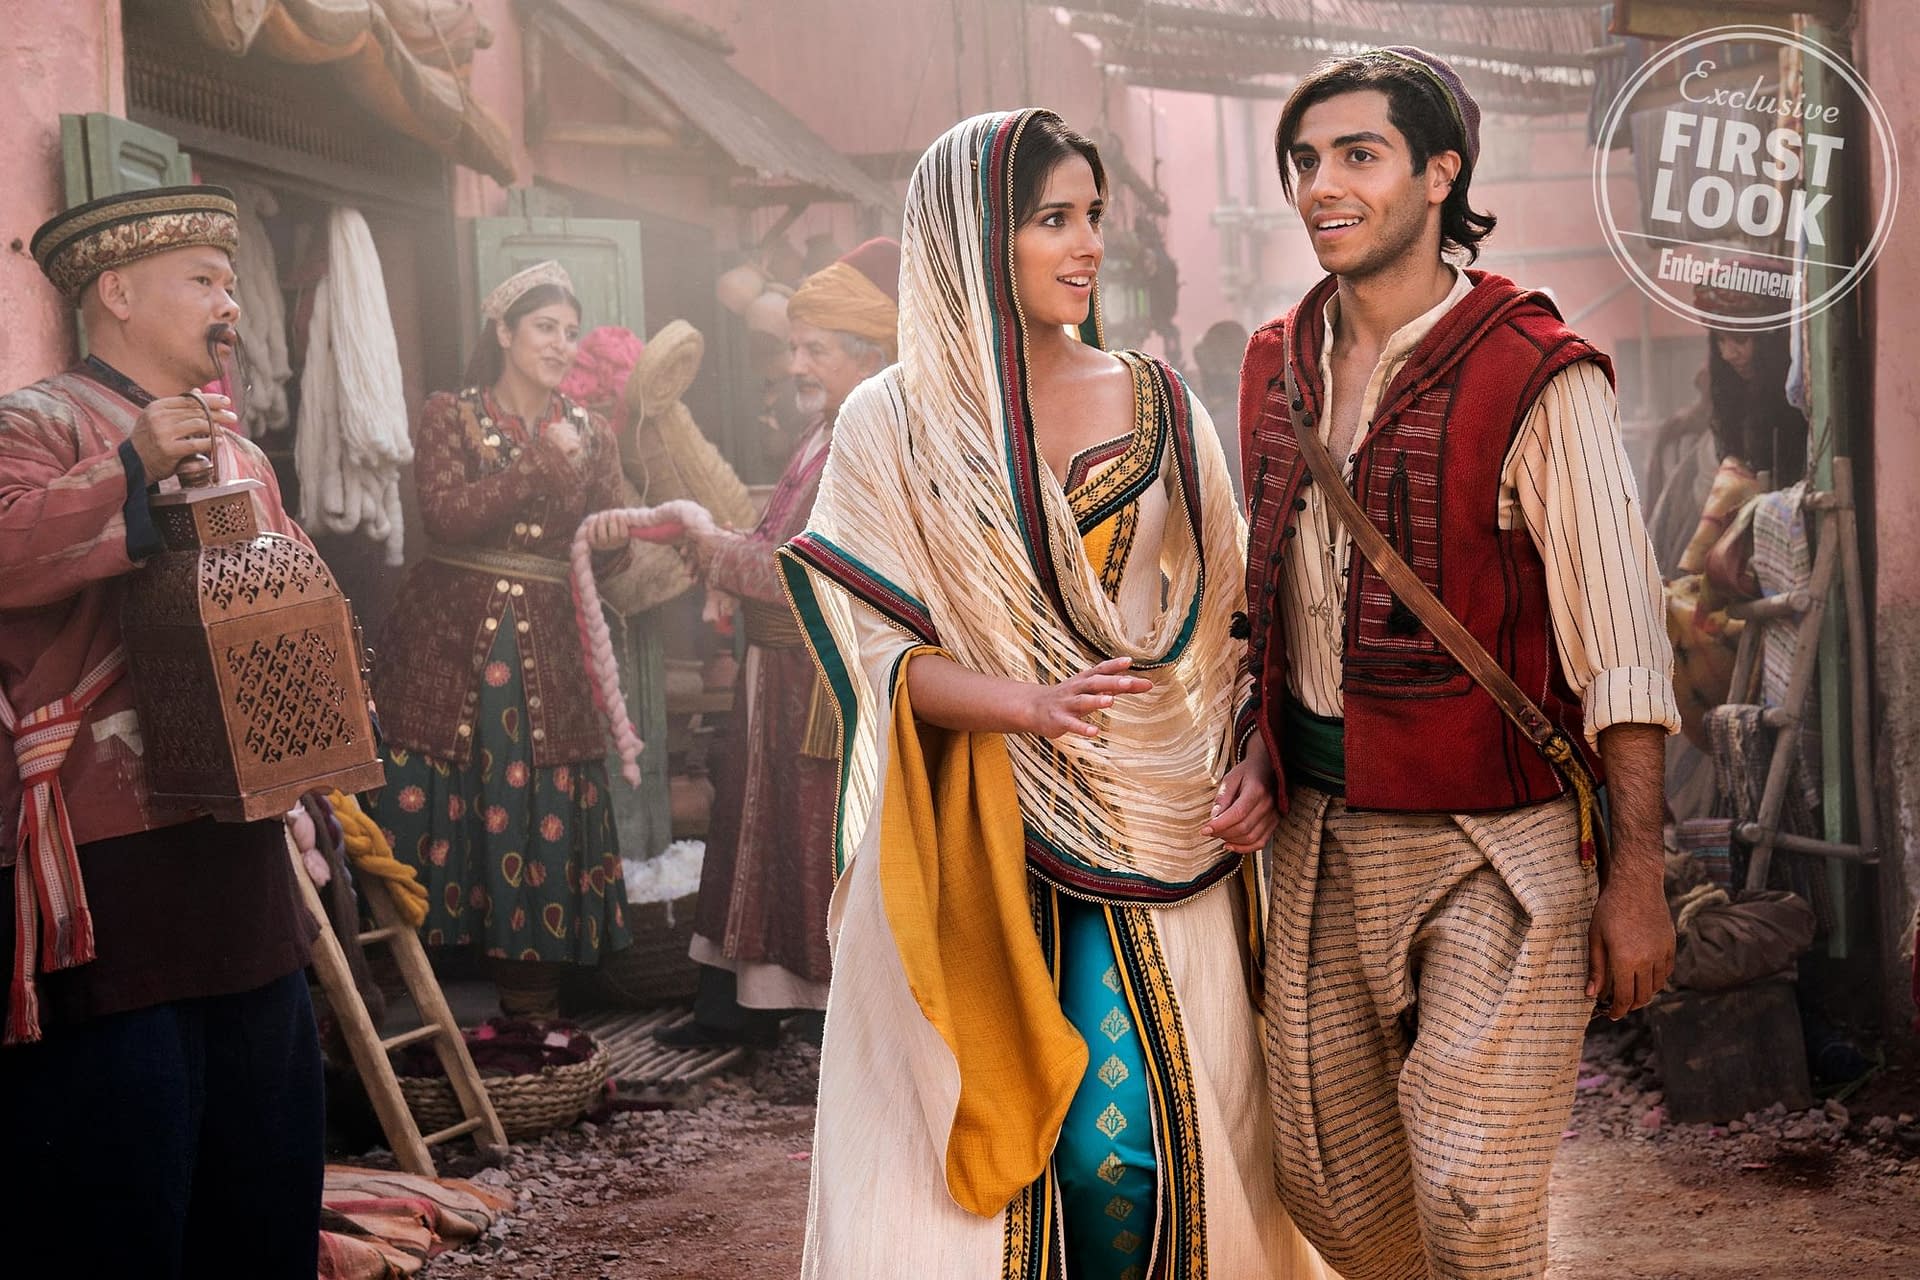 A New Trailer for the Live-Action Remake of Aladdin Will Drop Tomorrow